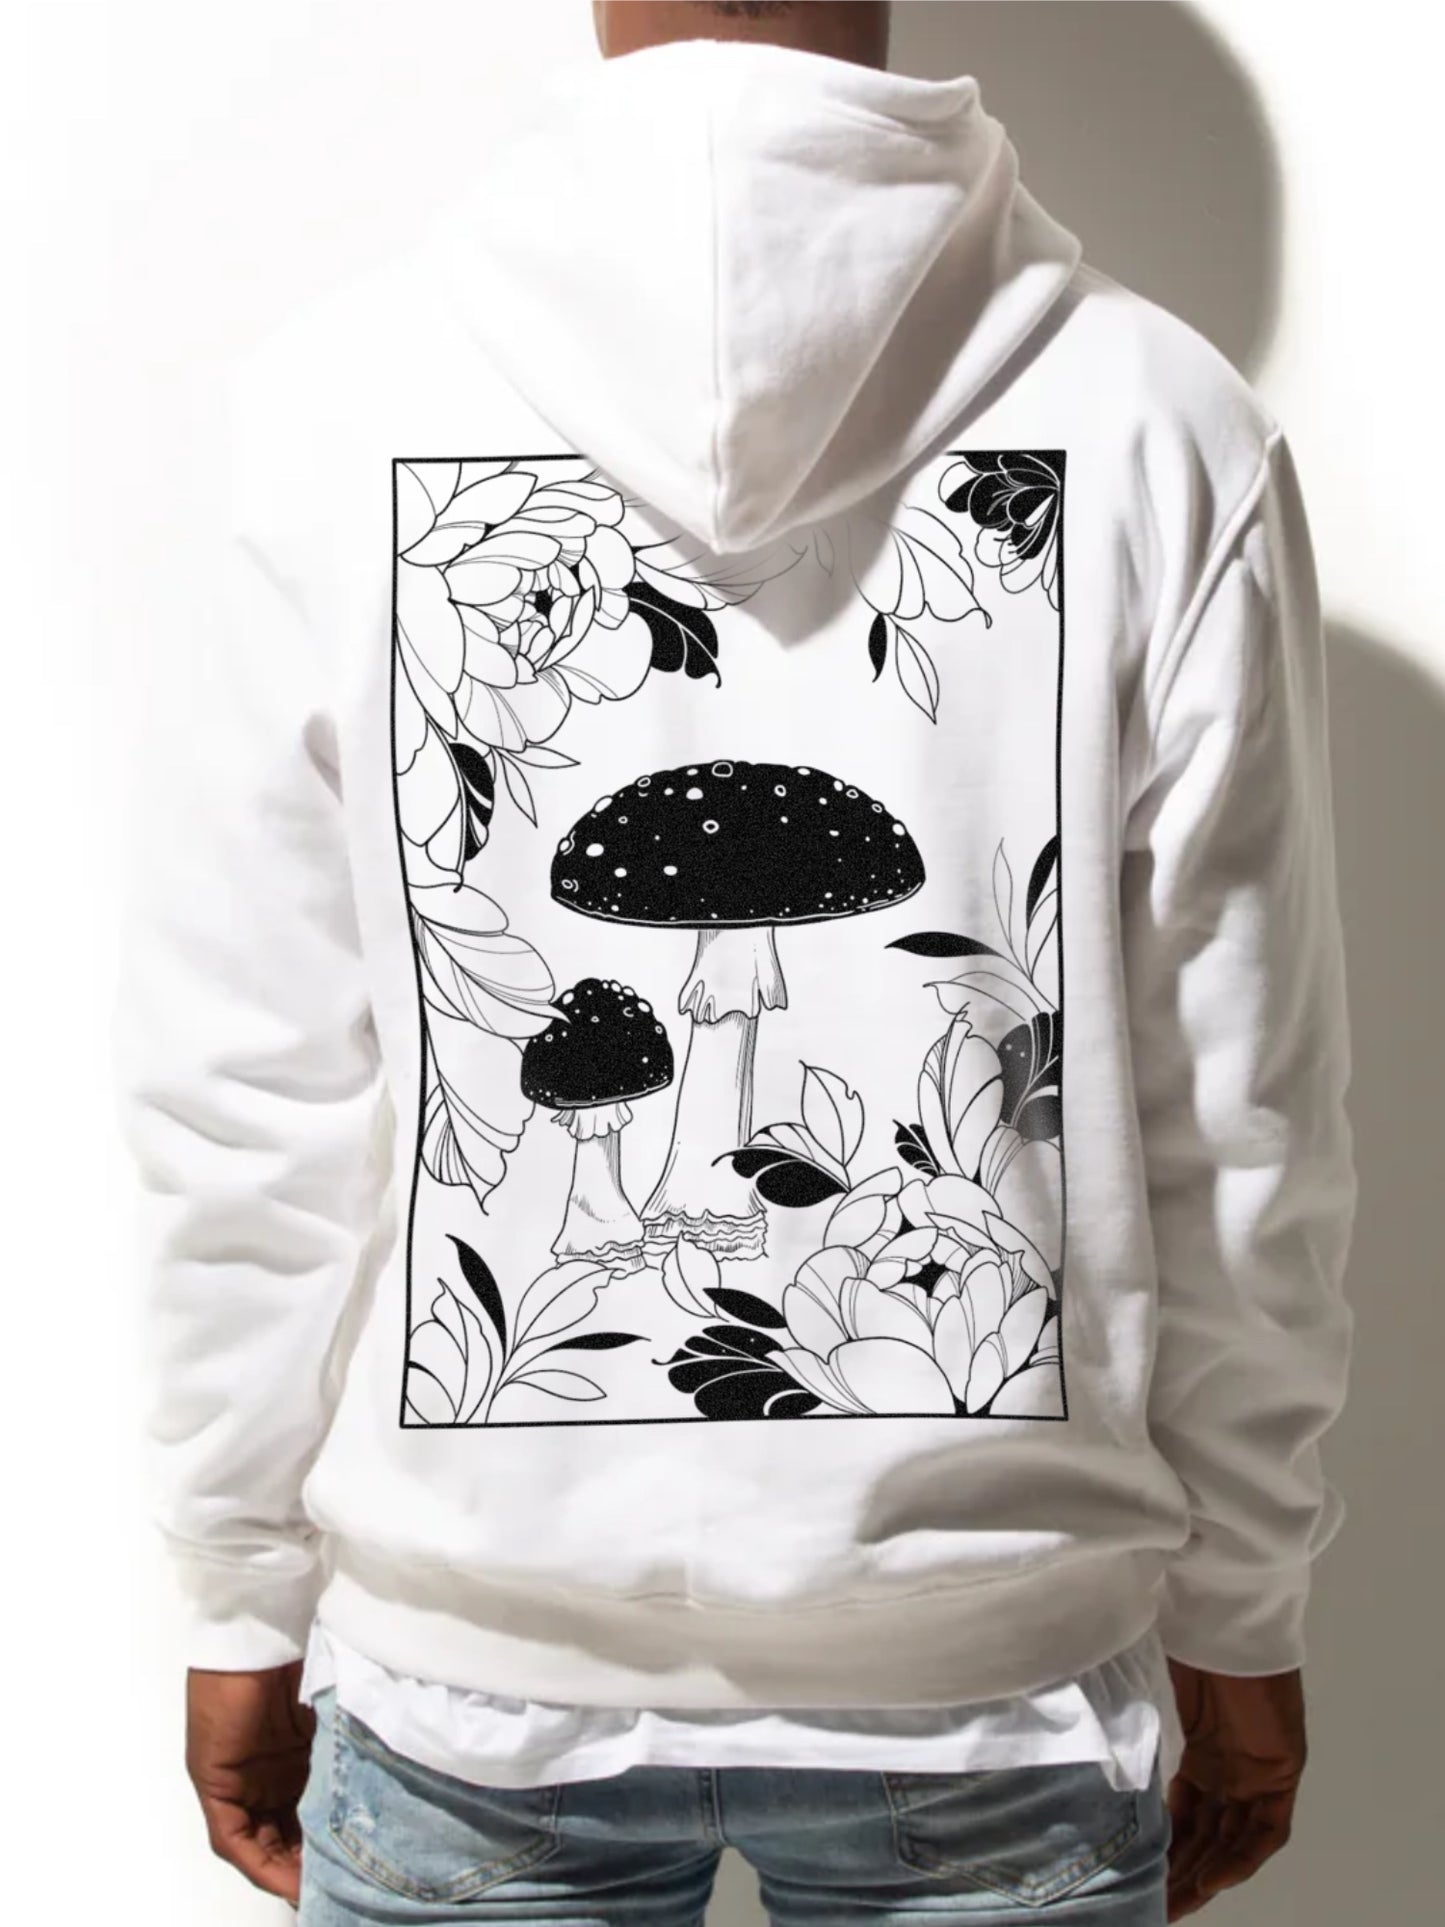 Amanita Muscaria Mushroom art surrounded by tattoo-inspired florals on a white hoodie